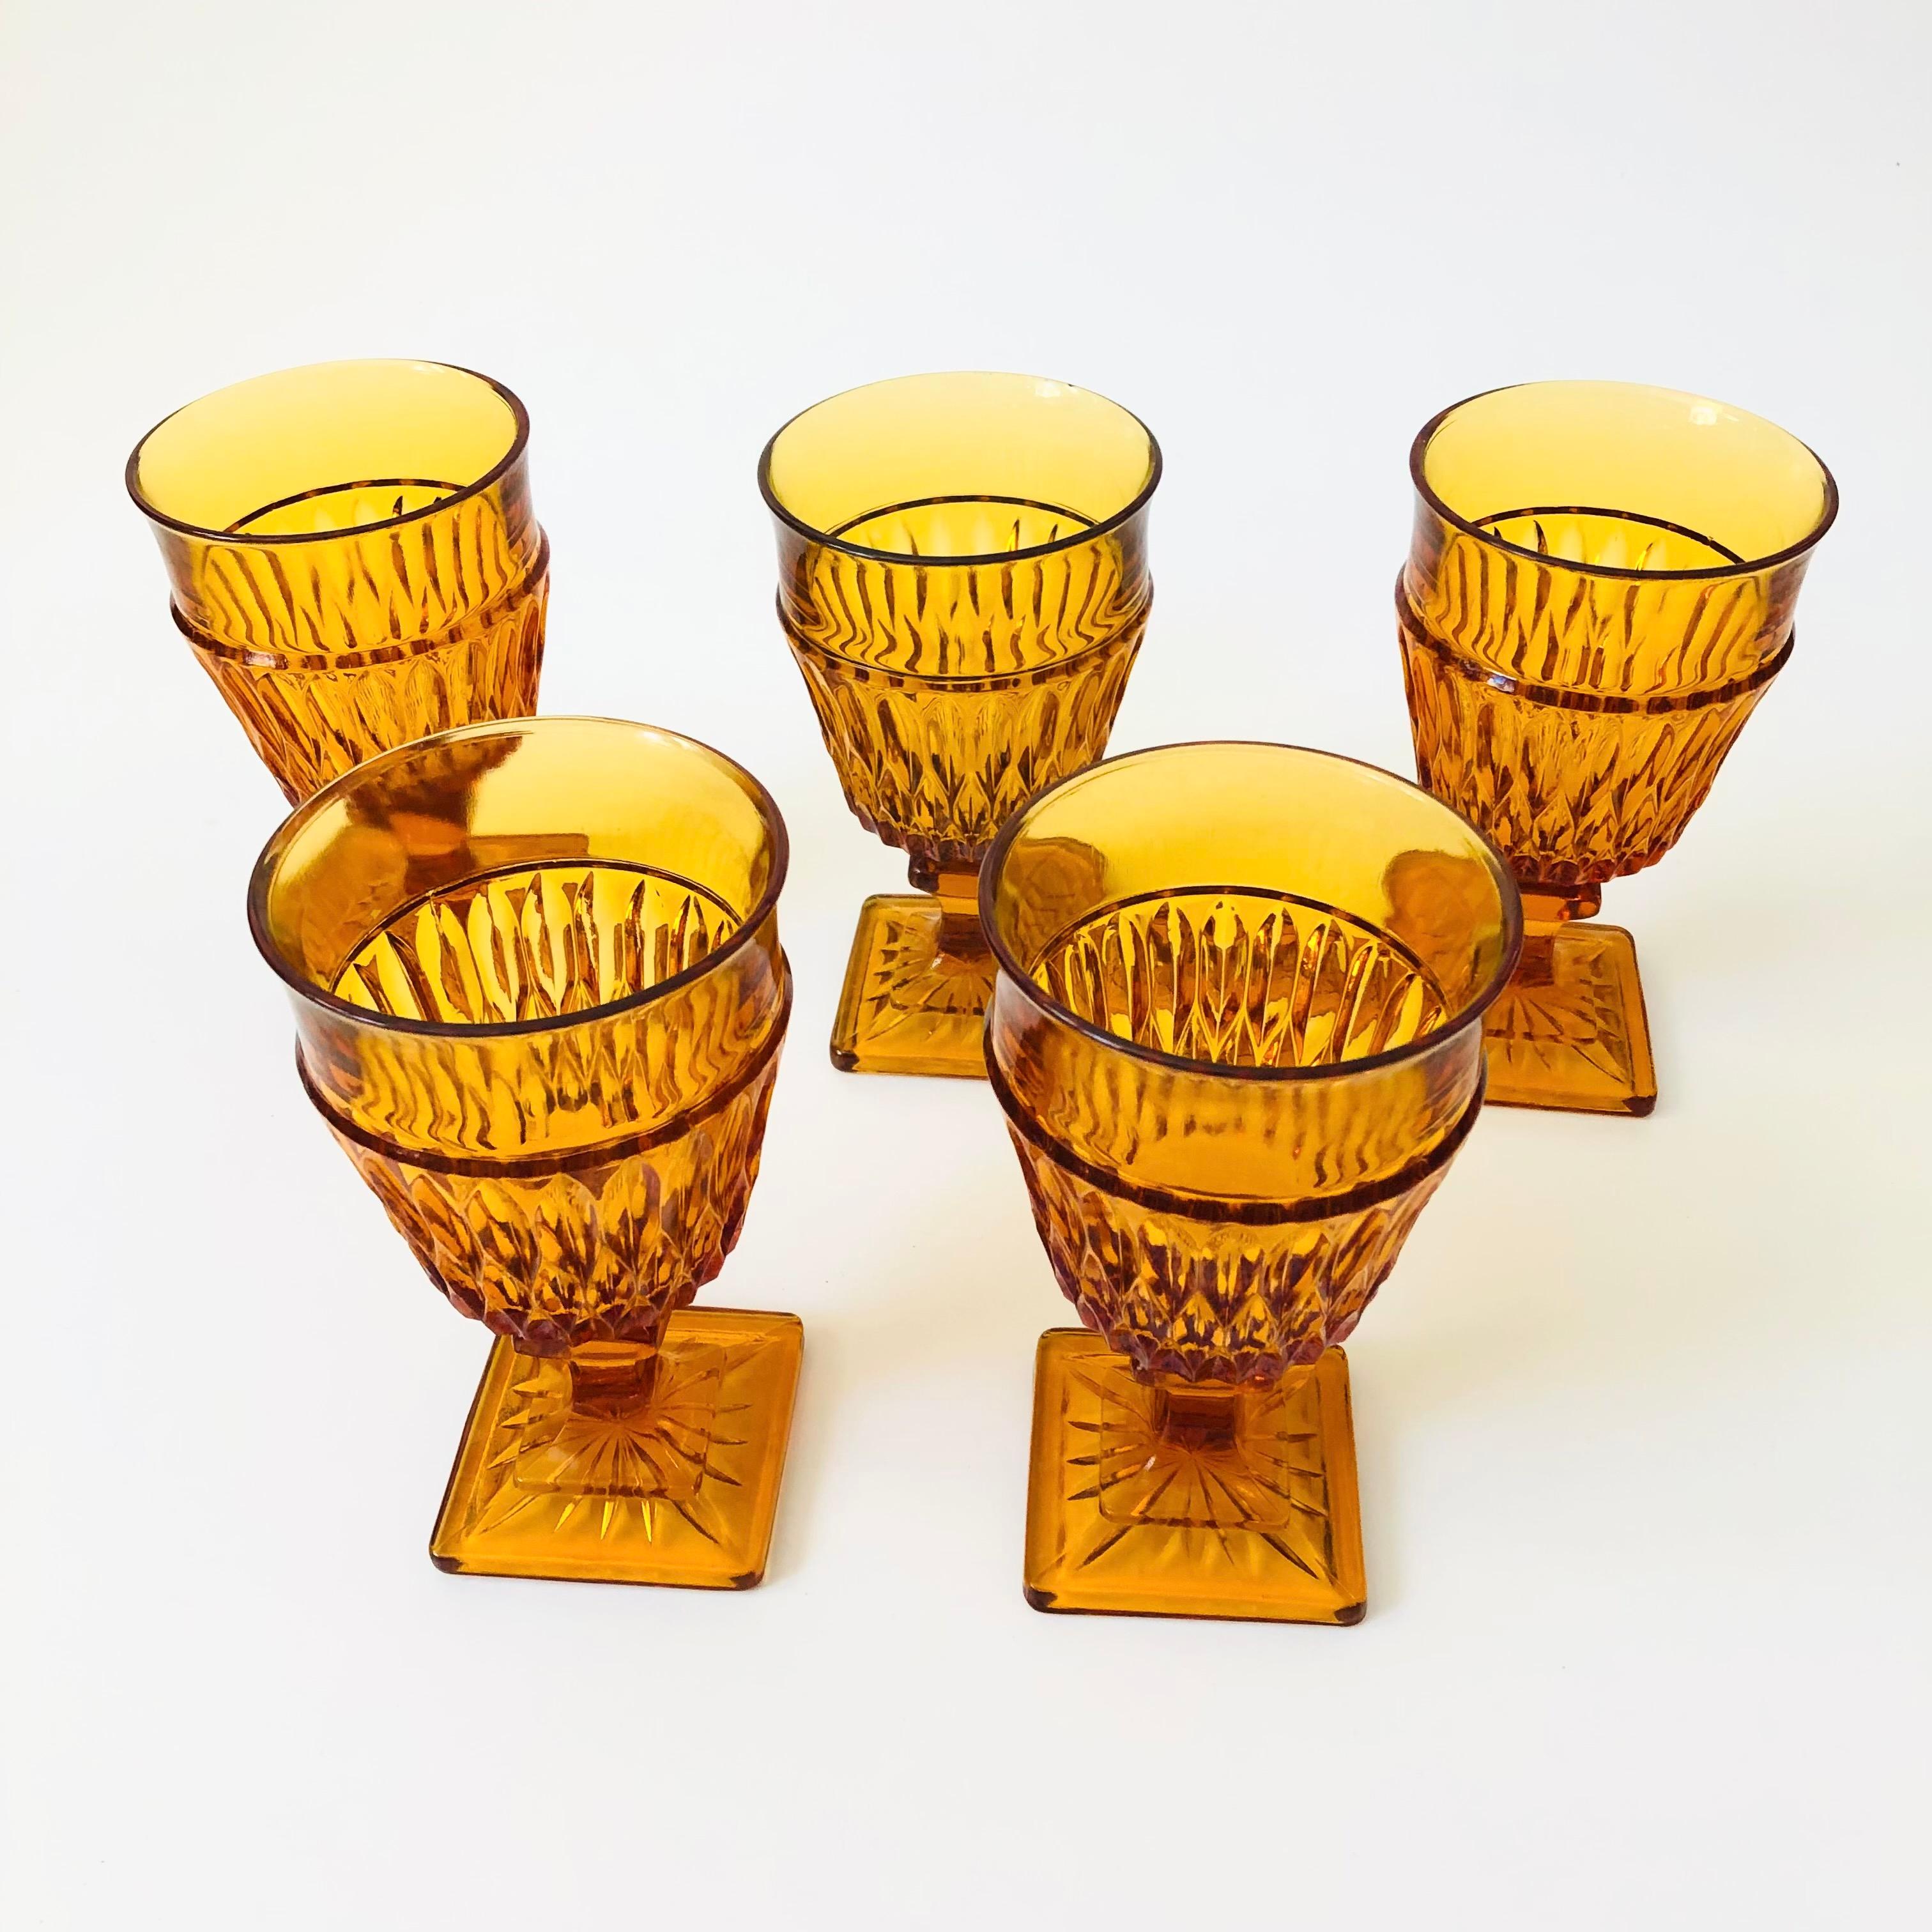 A set of 5 gorgeous wine goblets with a lovely ornate design in amber glass. Made in the 